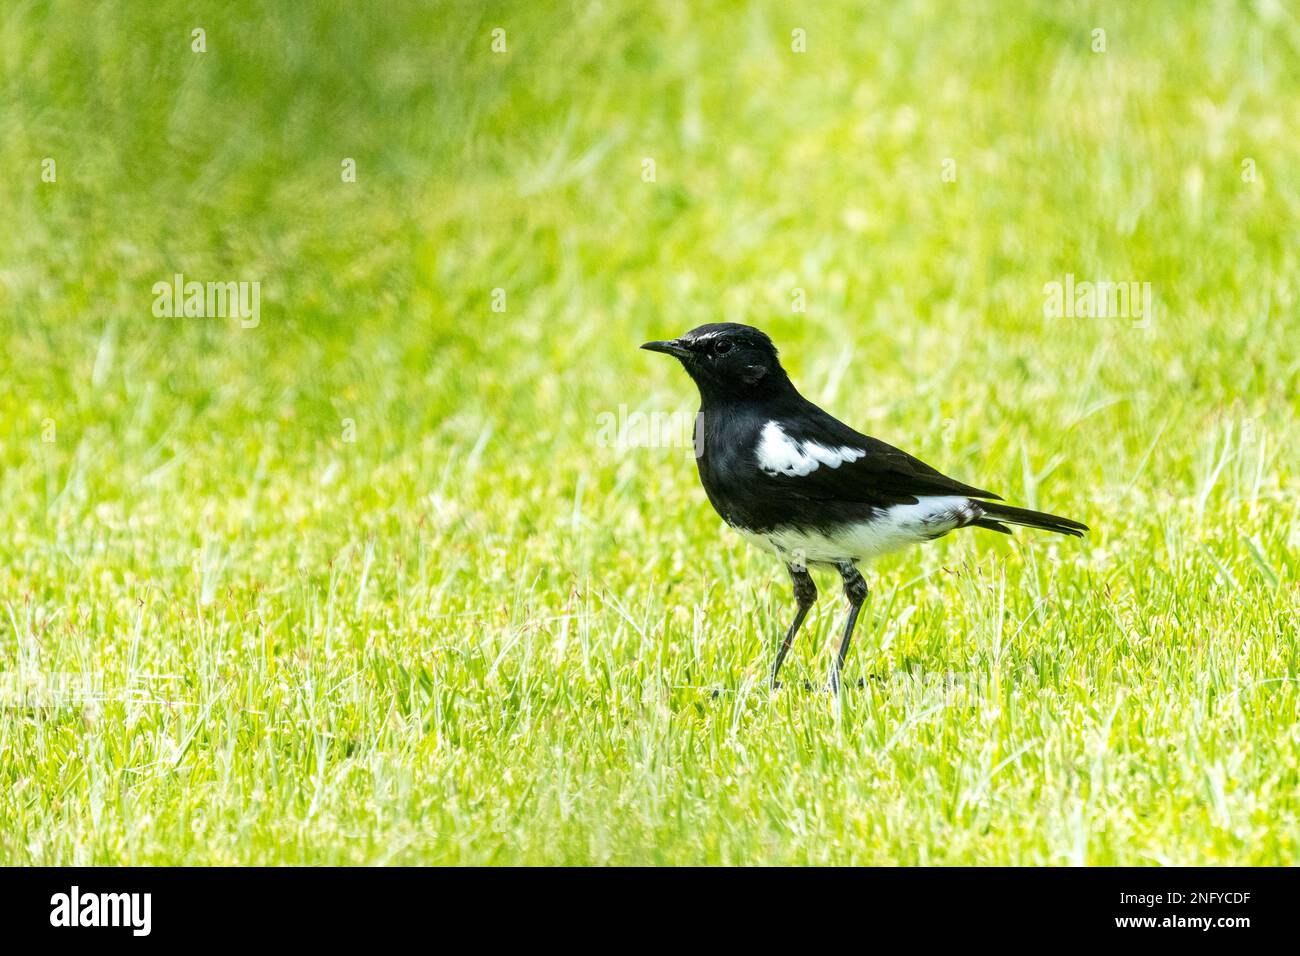 Mountain wheatear or Mountain chat (Myrmecocichla monticola) small male passerine bird closeup side on, in profile on grass in Gauteng, South Africa Stock Photo